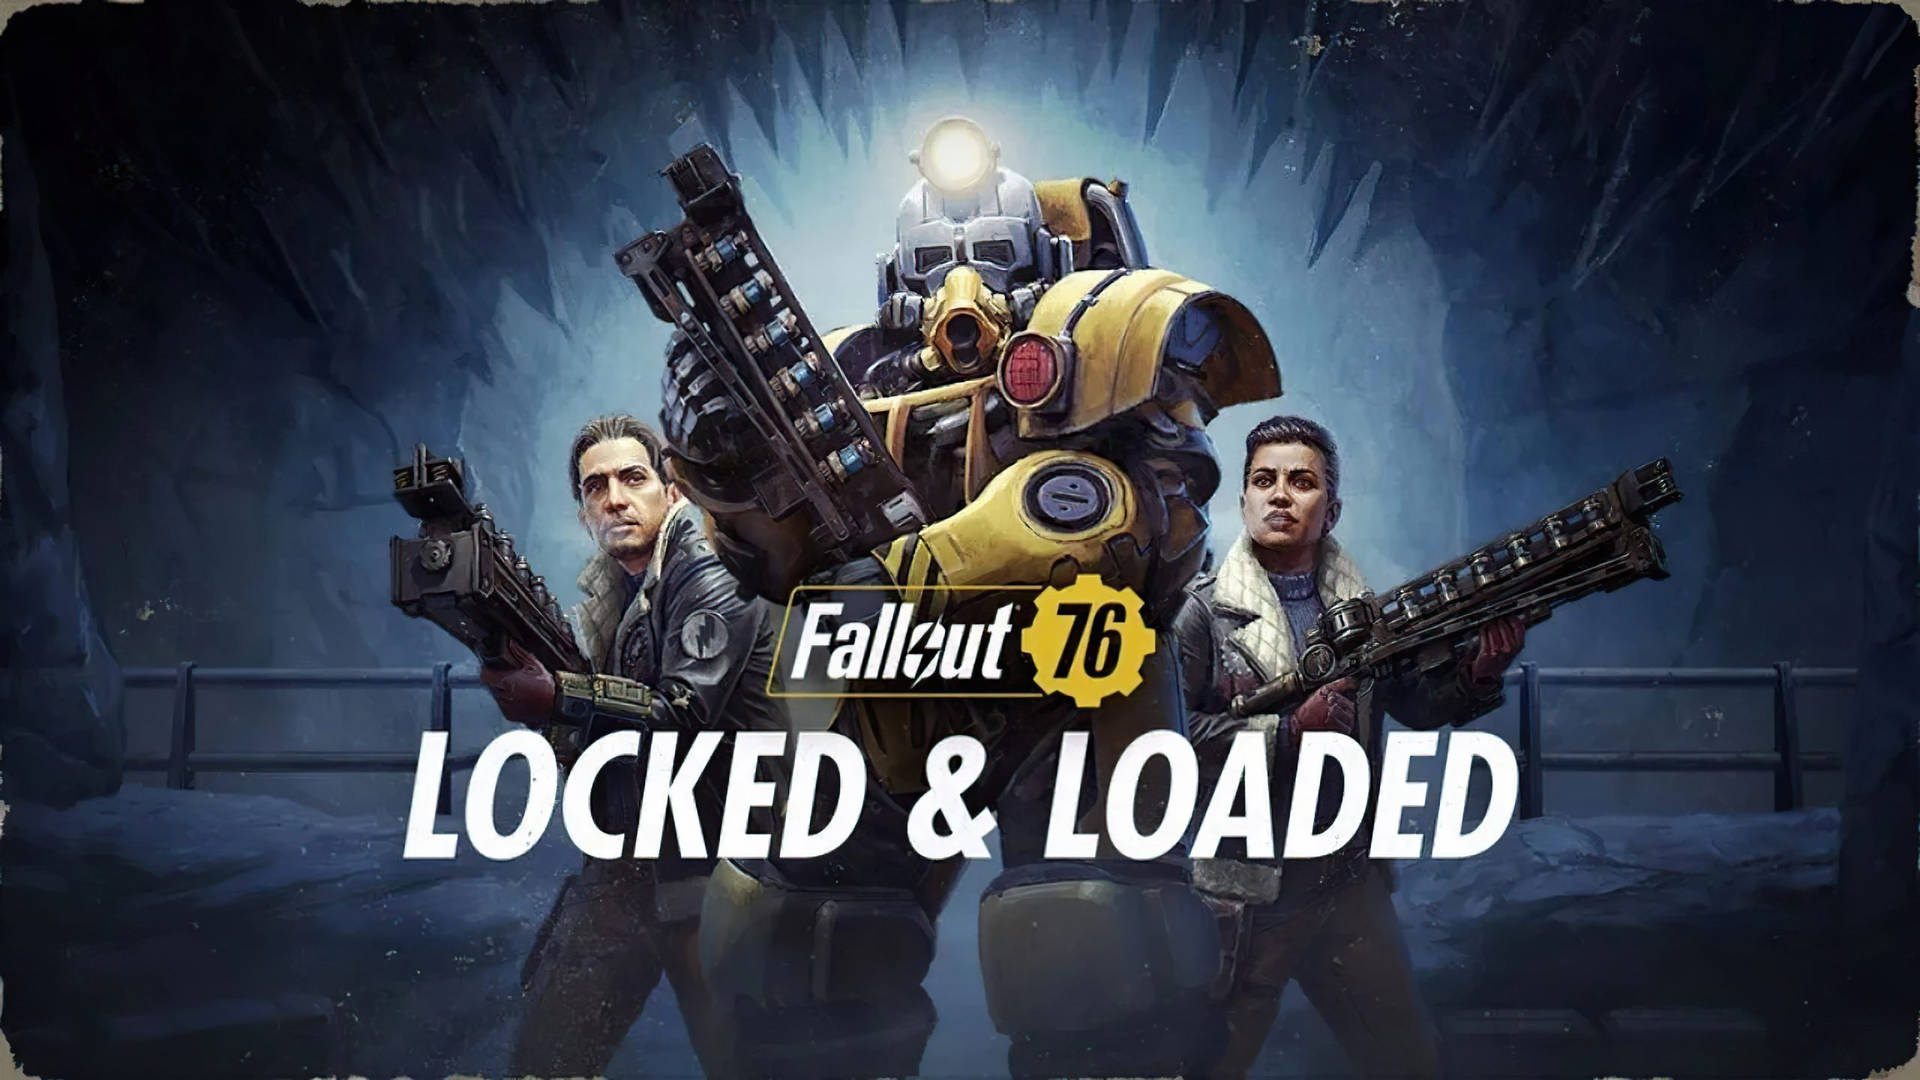 Fallout 76 Locked & Loaded Background